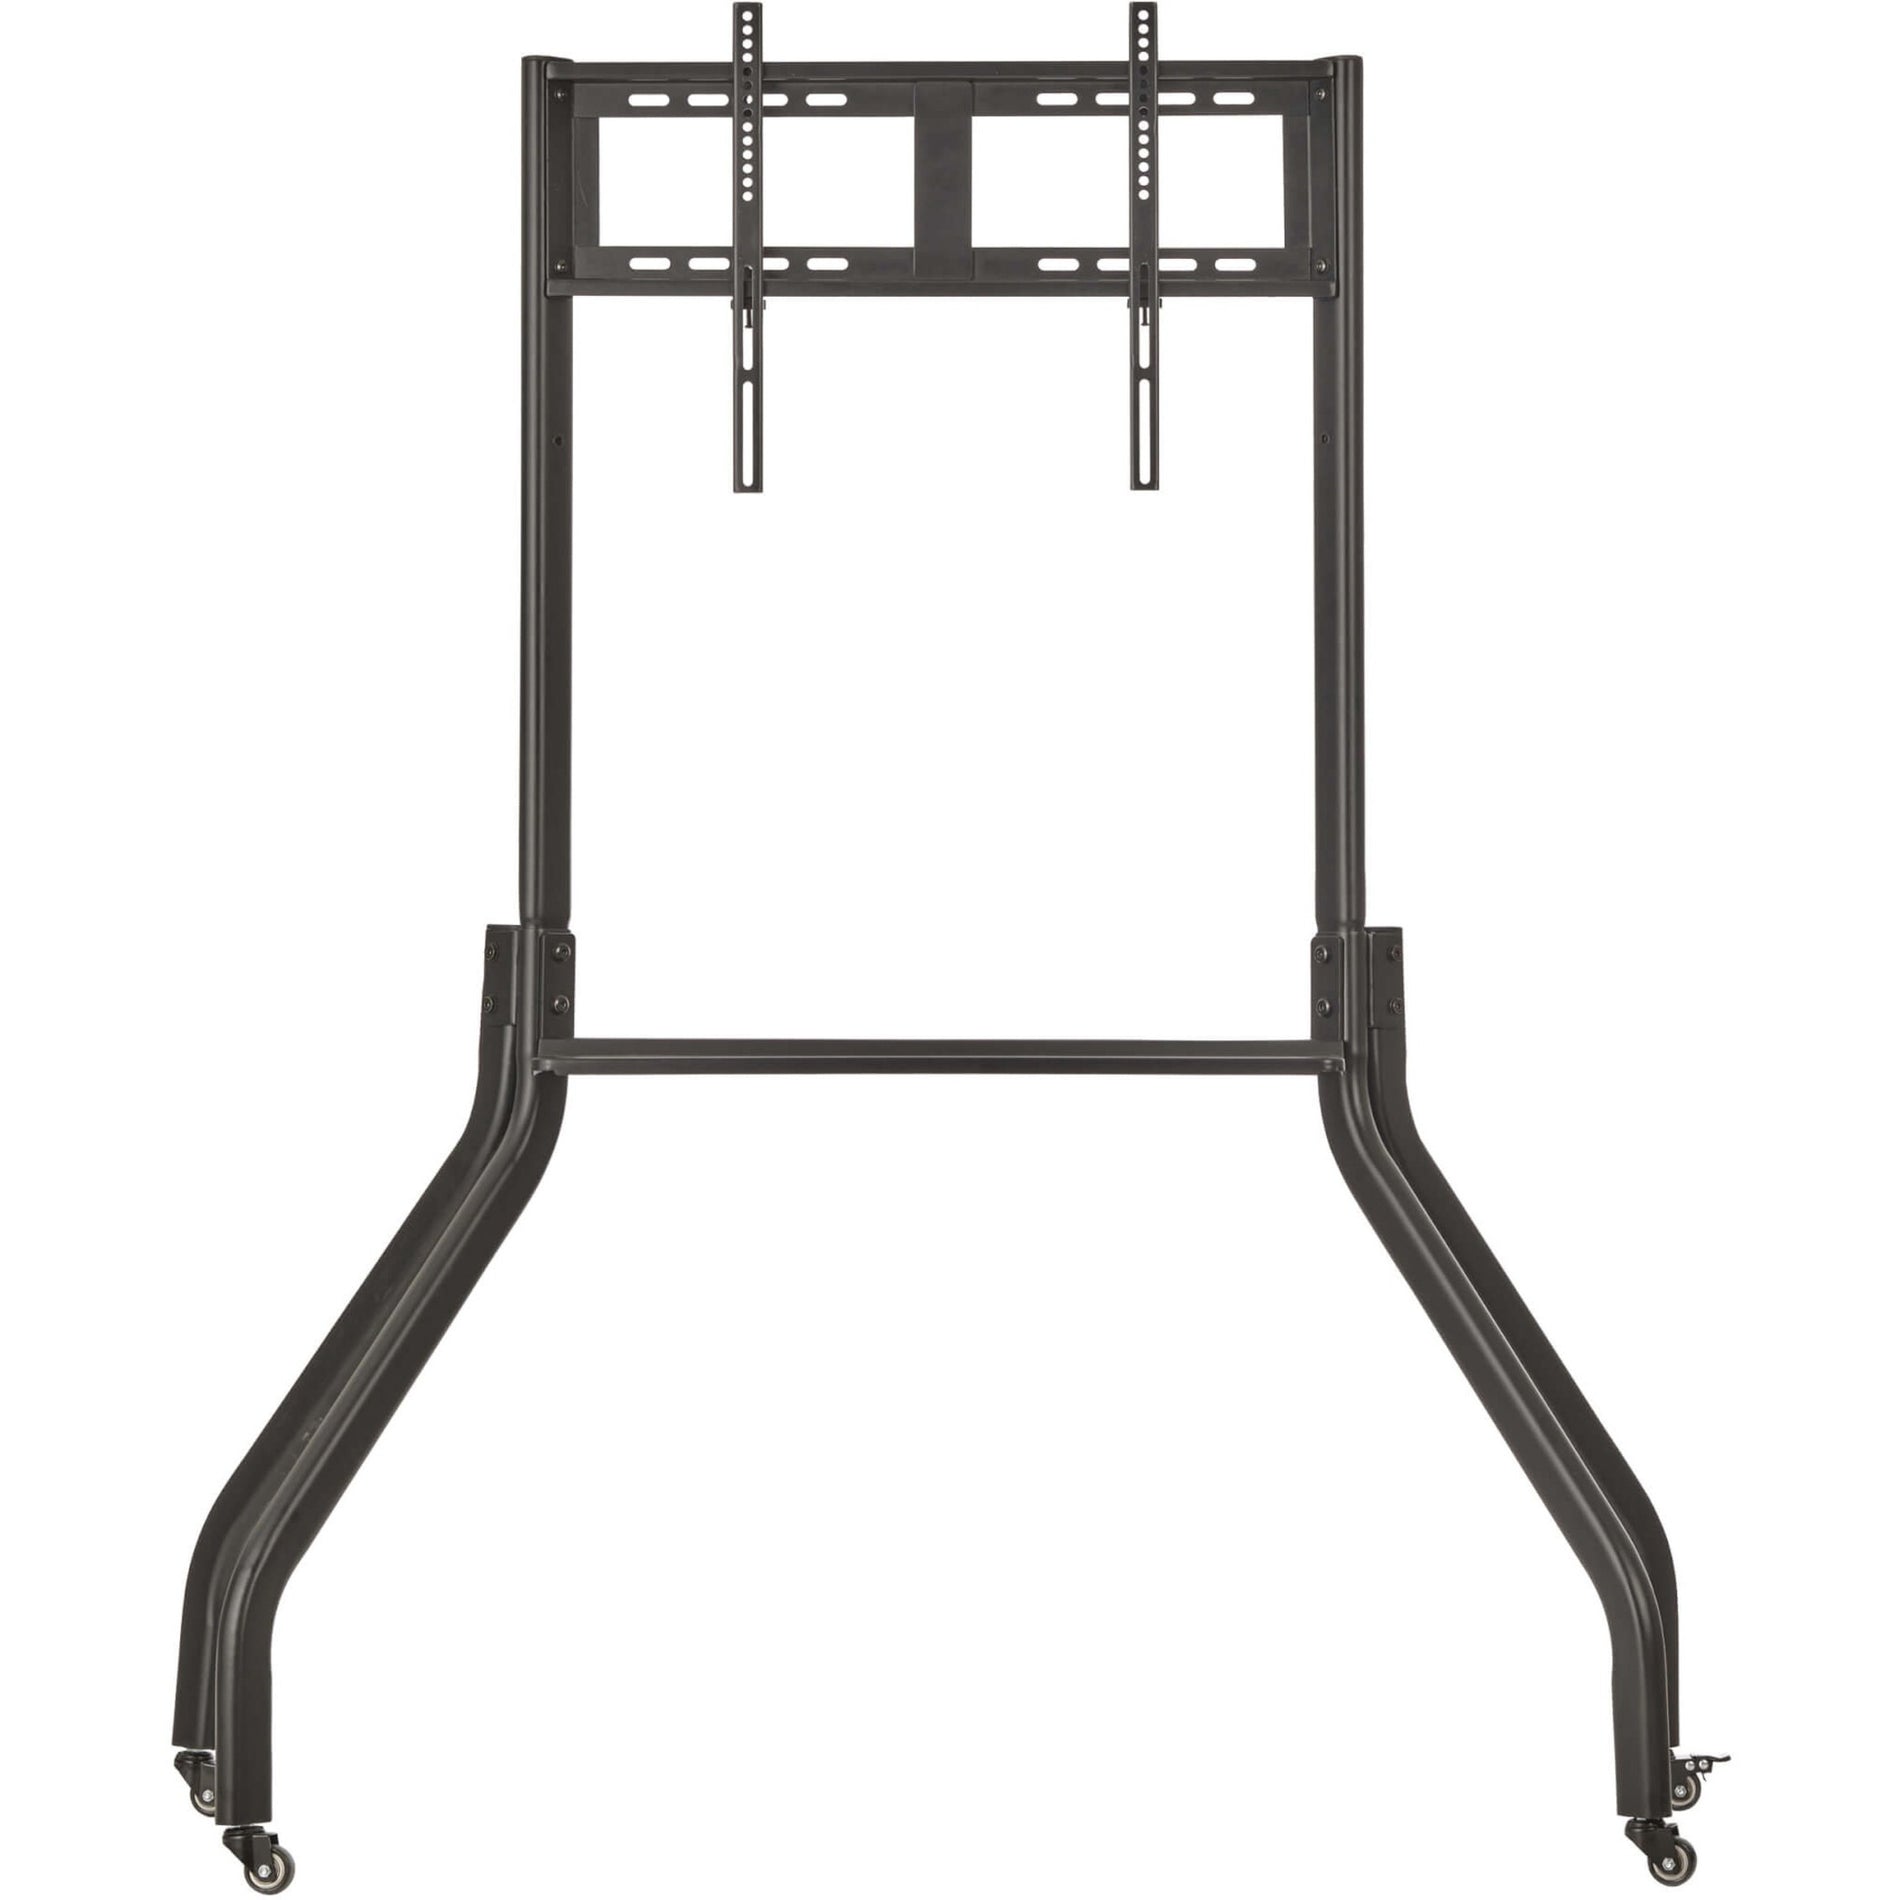 Rolling TV Cart for 42" to 65" Displays, Wide Legs, Locking Casters [Discontinued]